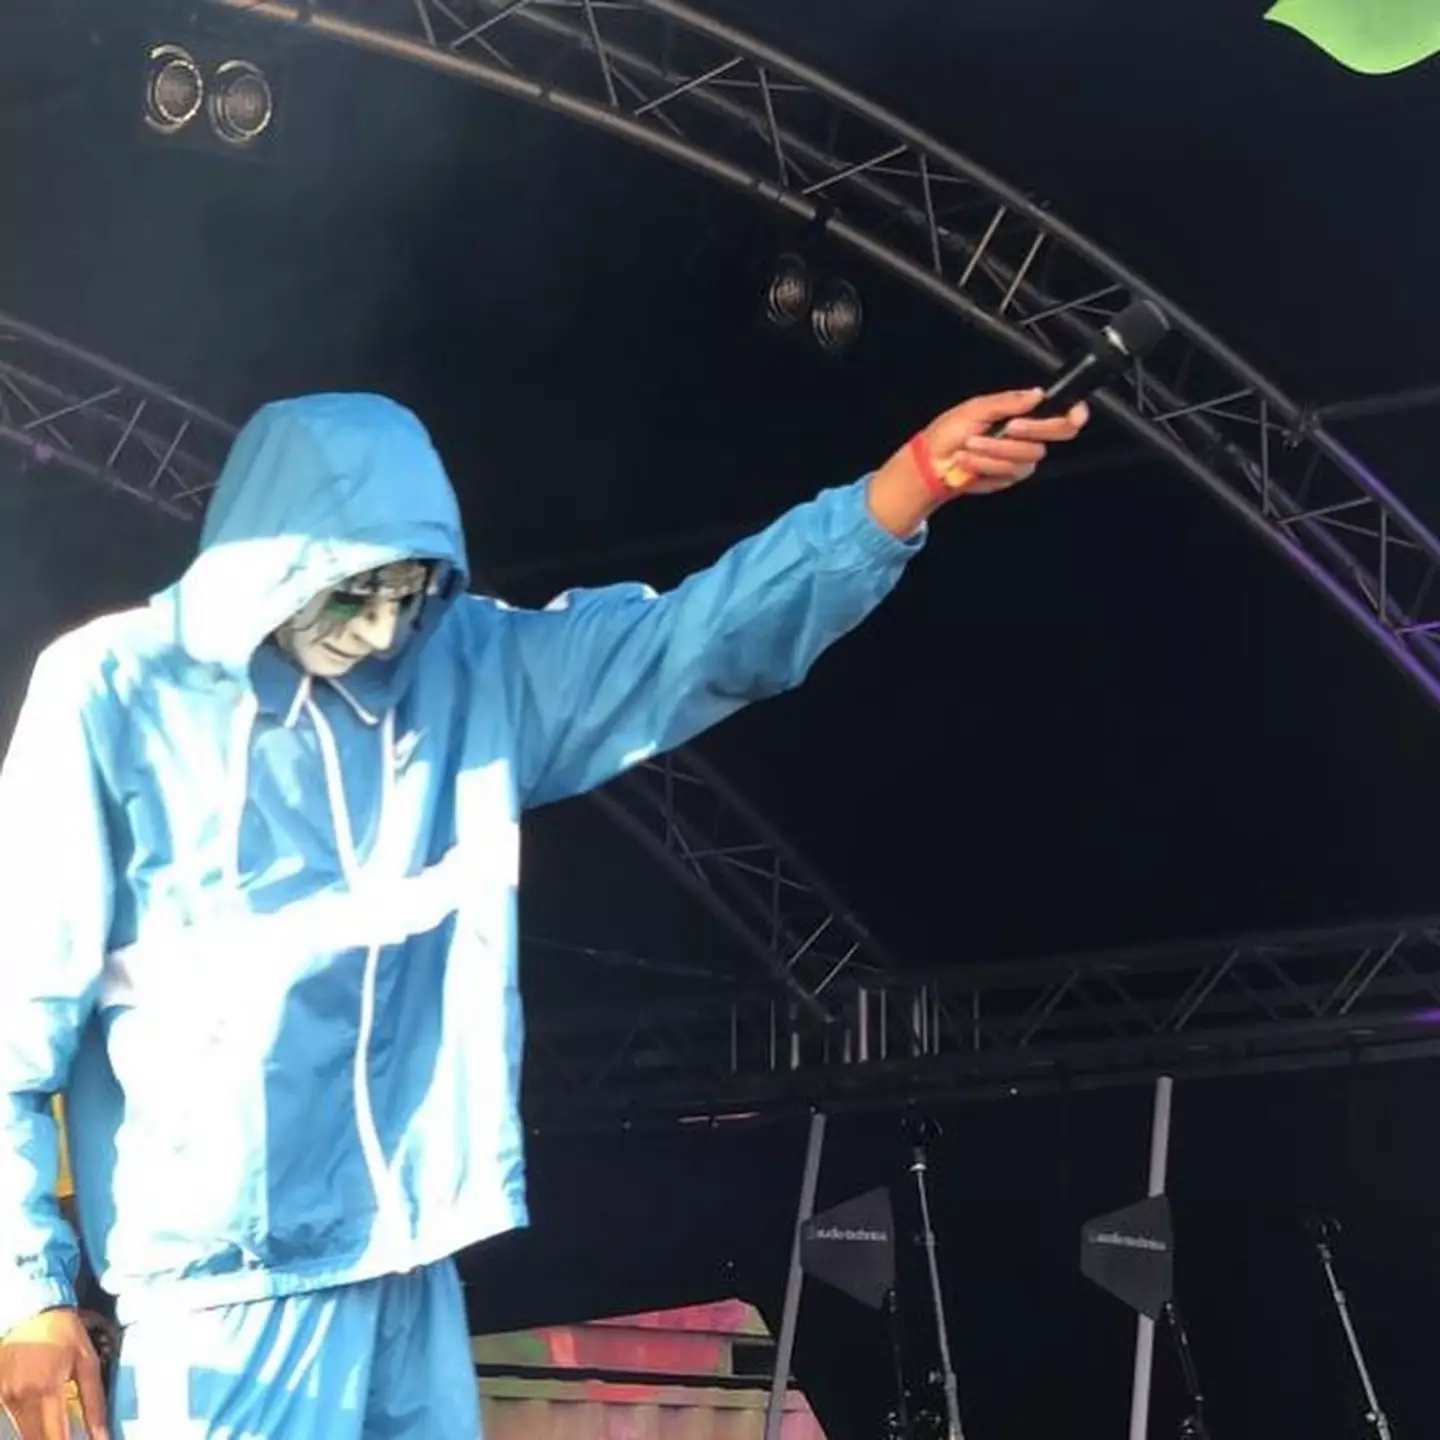 TkorStretch wore masks whilst performing to hide his face.